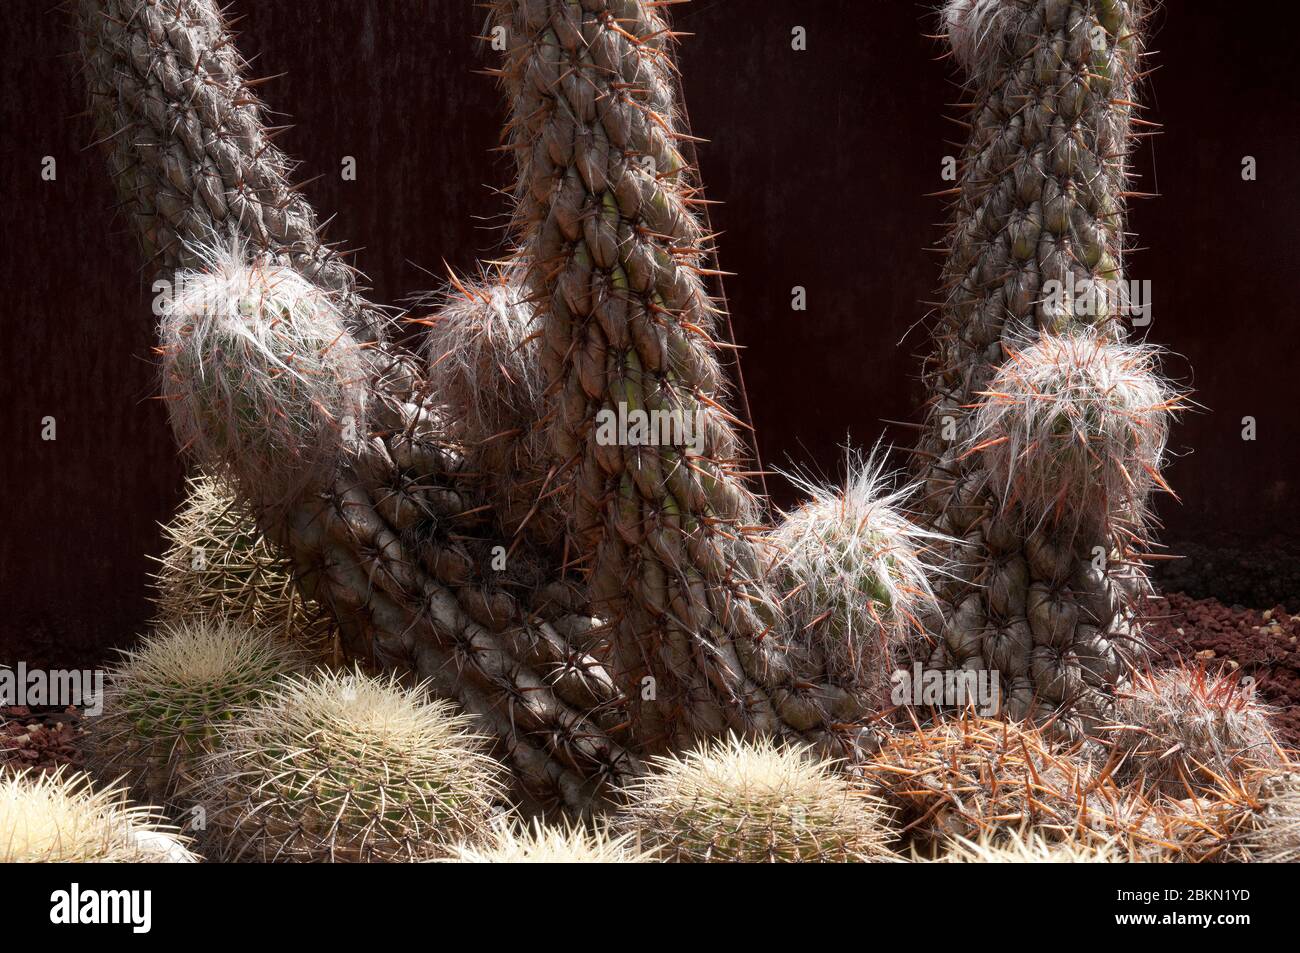 Sydney Australia, Oreocereus celsianus or 'old man of the mountain' surrounded by golden barrel cactus Stock Photo